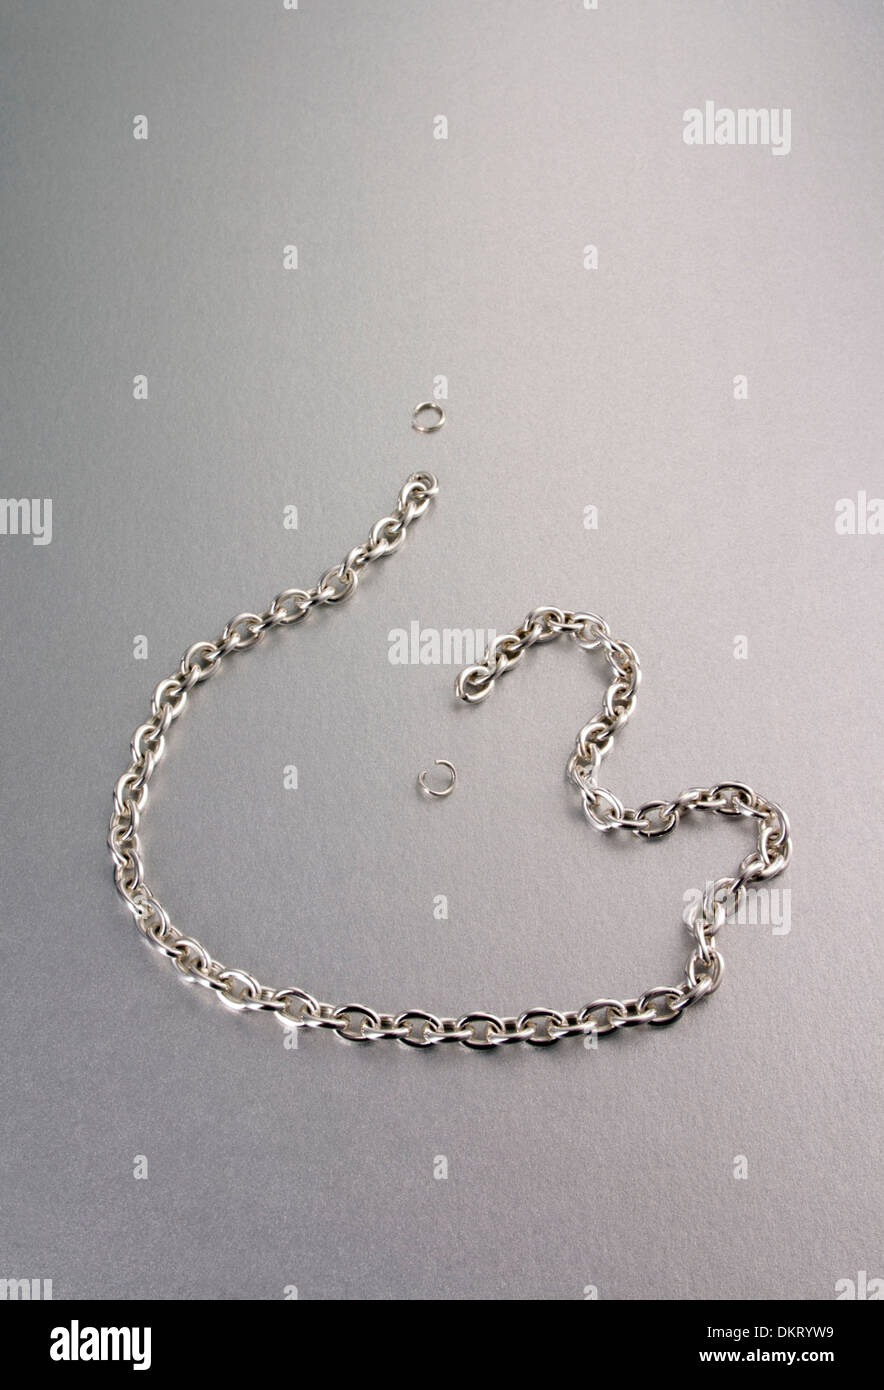 A silver link chain, broken with missing links on a silver background. Stock Photo